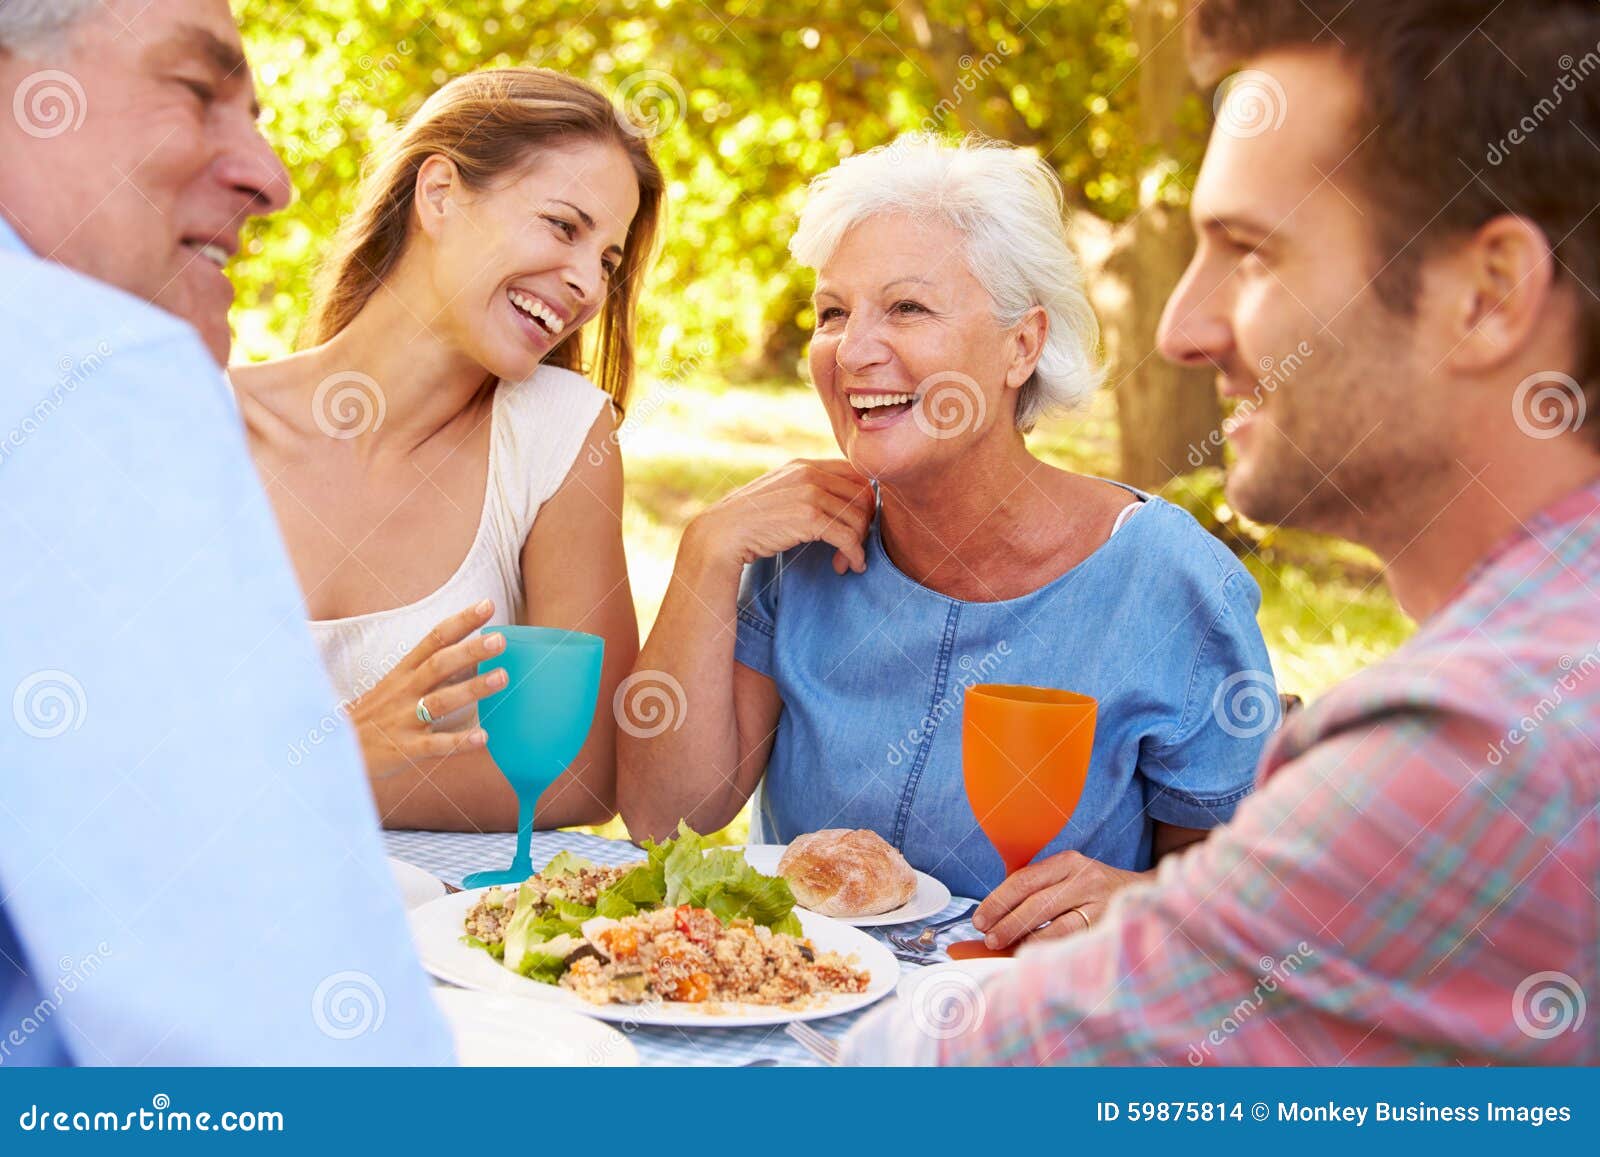 a senior and a young adult couple eating together outdoors